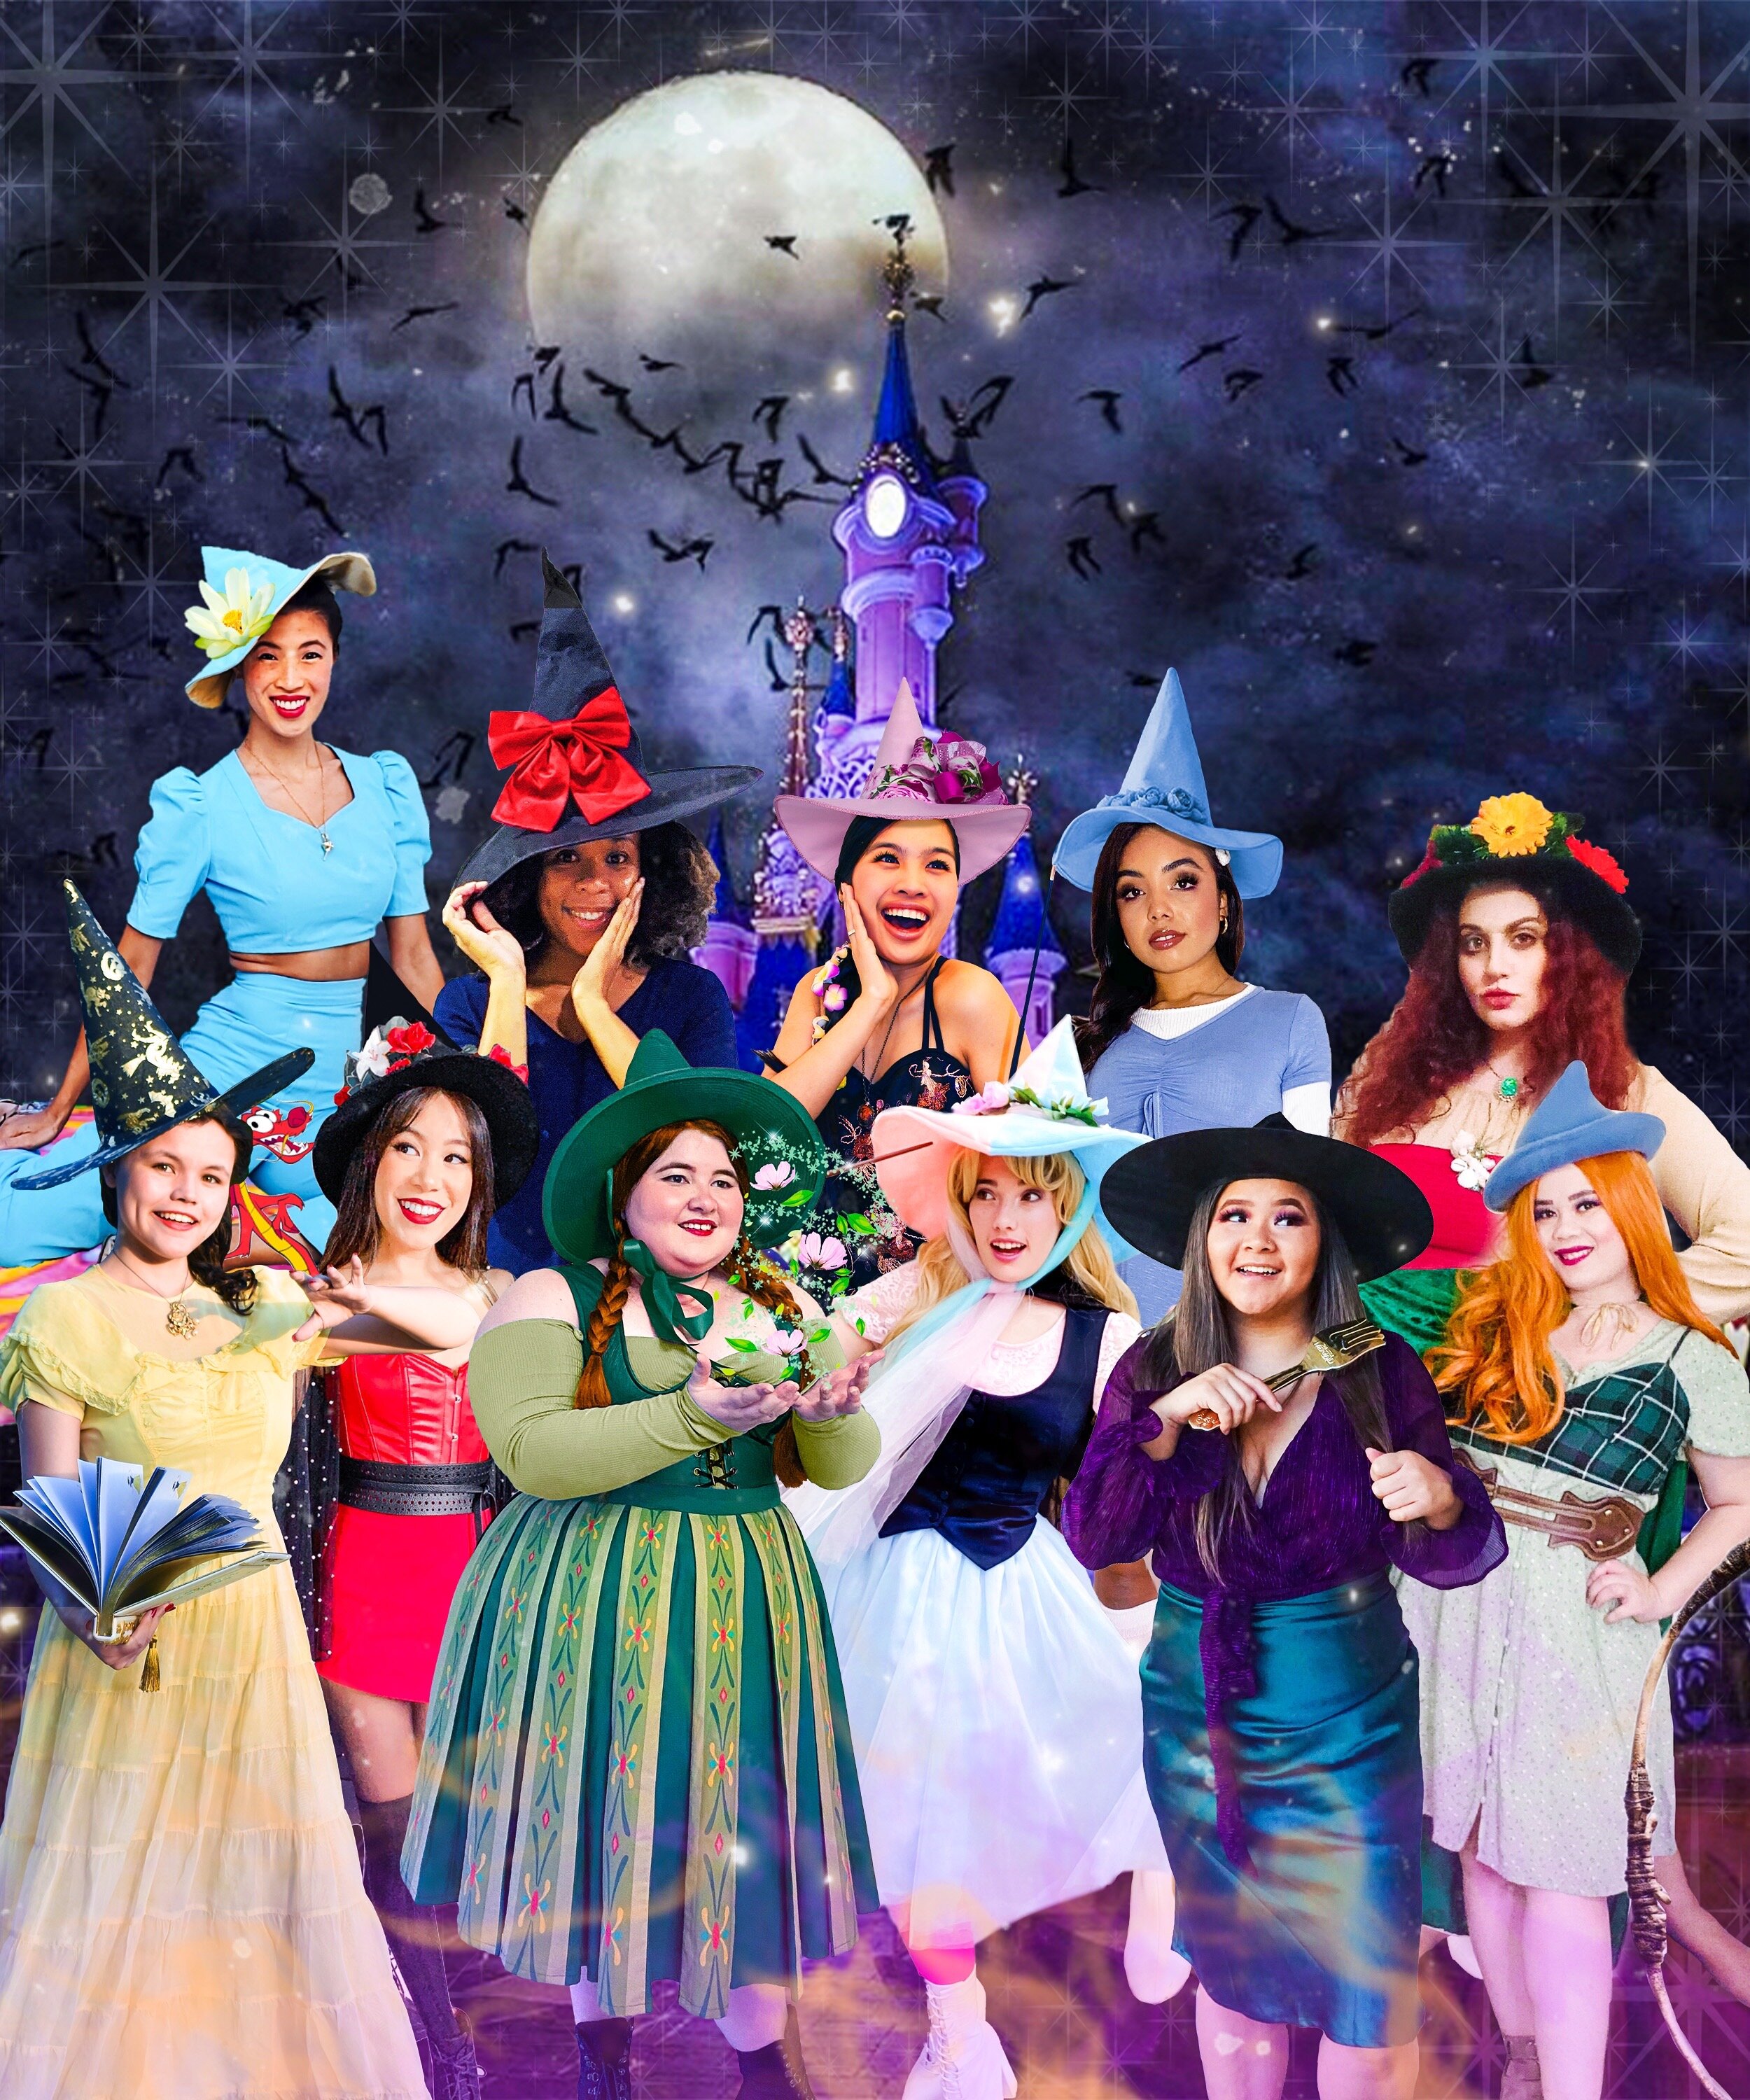 Disney Princesses as Witches